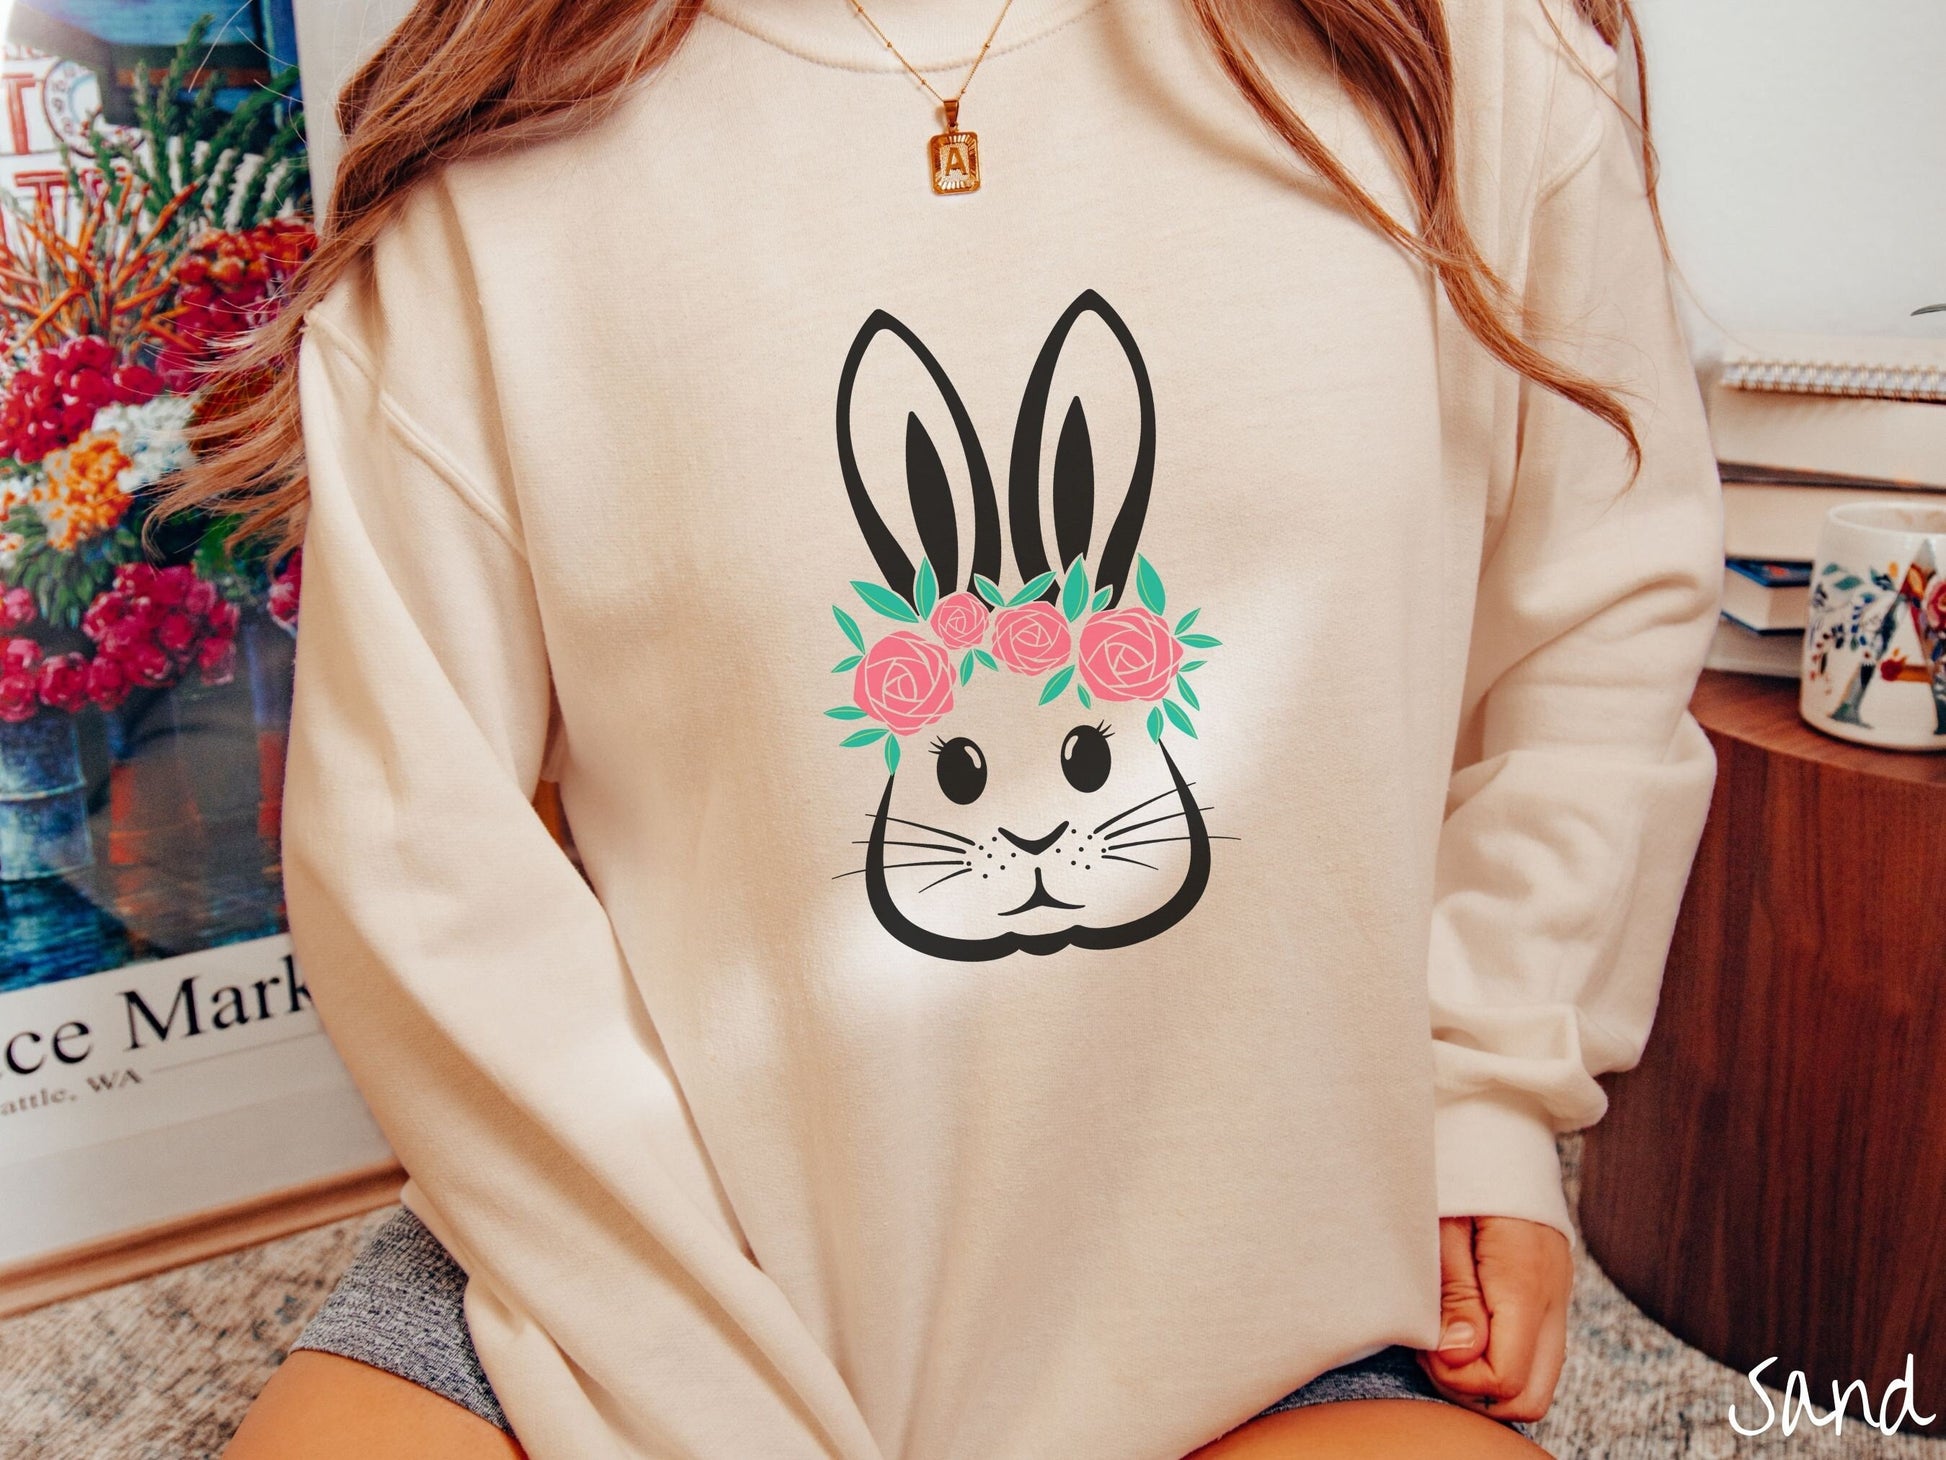 A woman wearing a cute, vintage sand colored sweatshirt with a black outline of a bunny rabbit with eyelashes, whiskers, and floppy ears that has a pink flowered headband resting below its large ears.